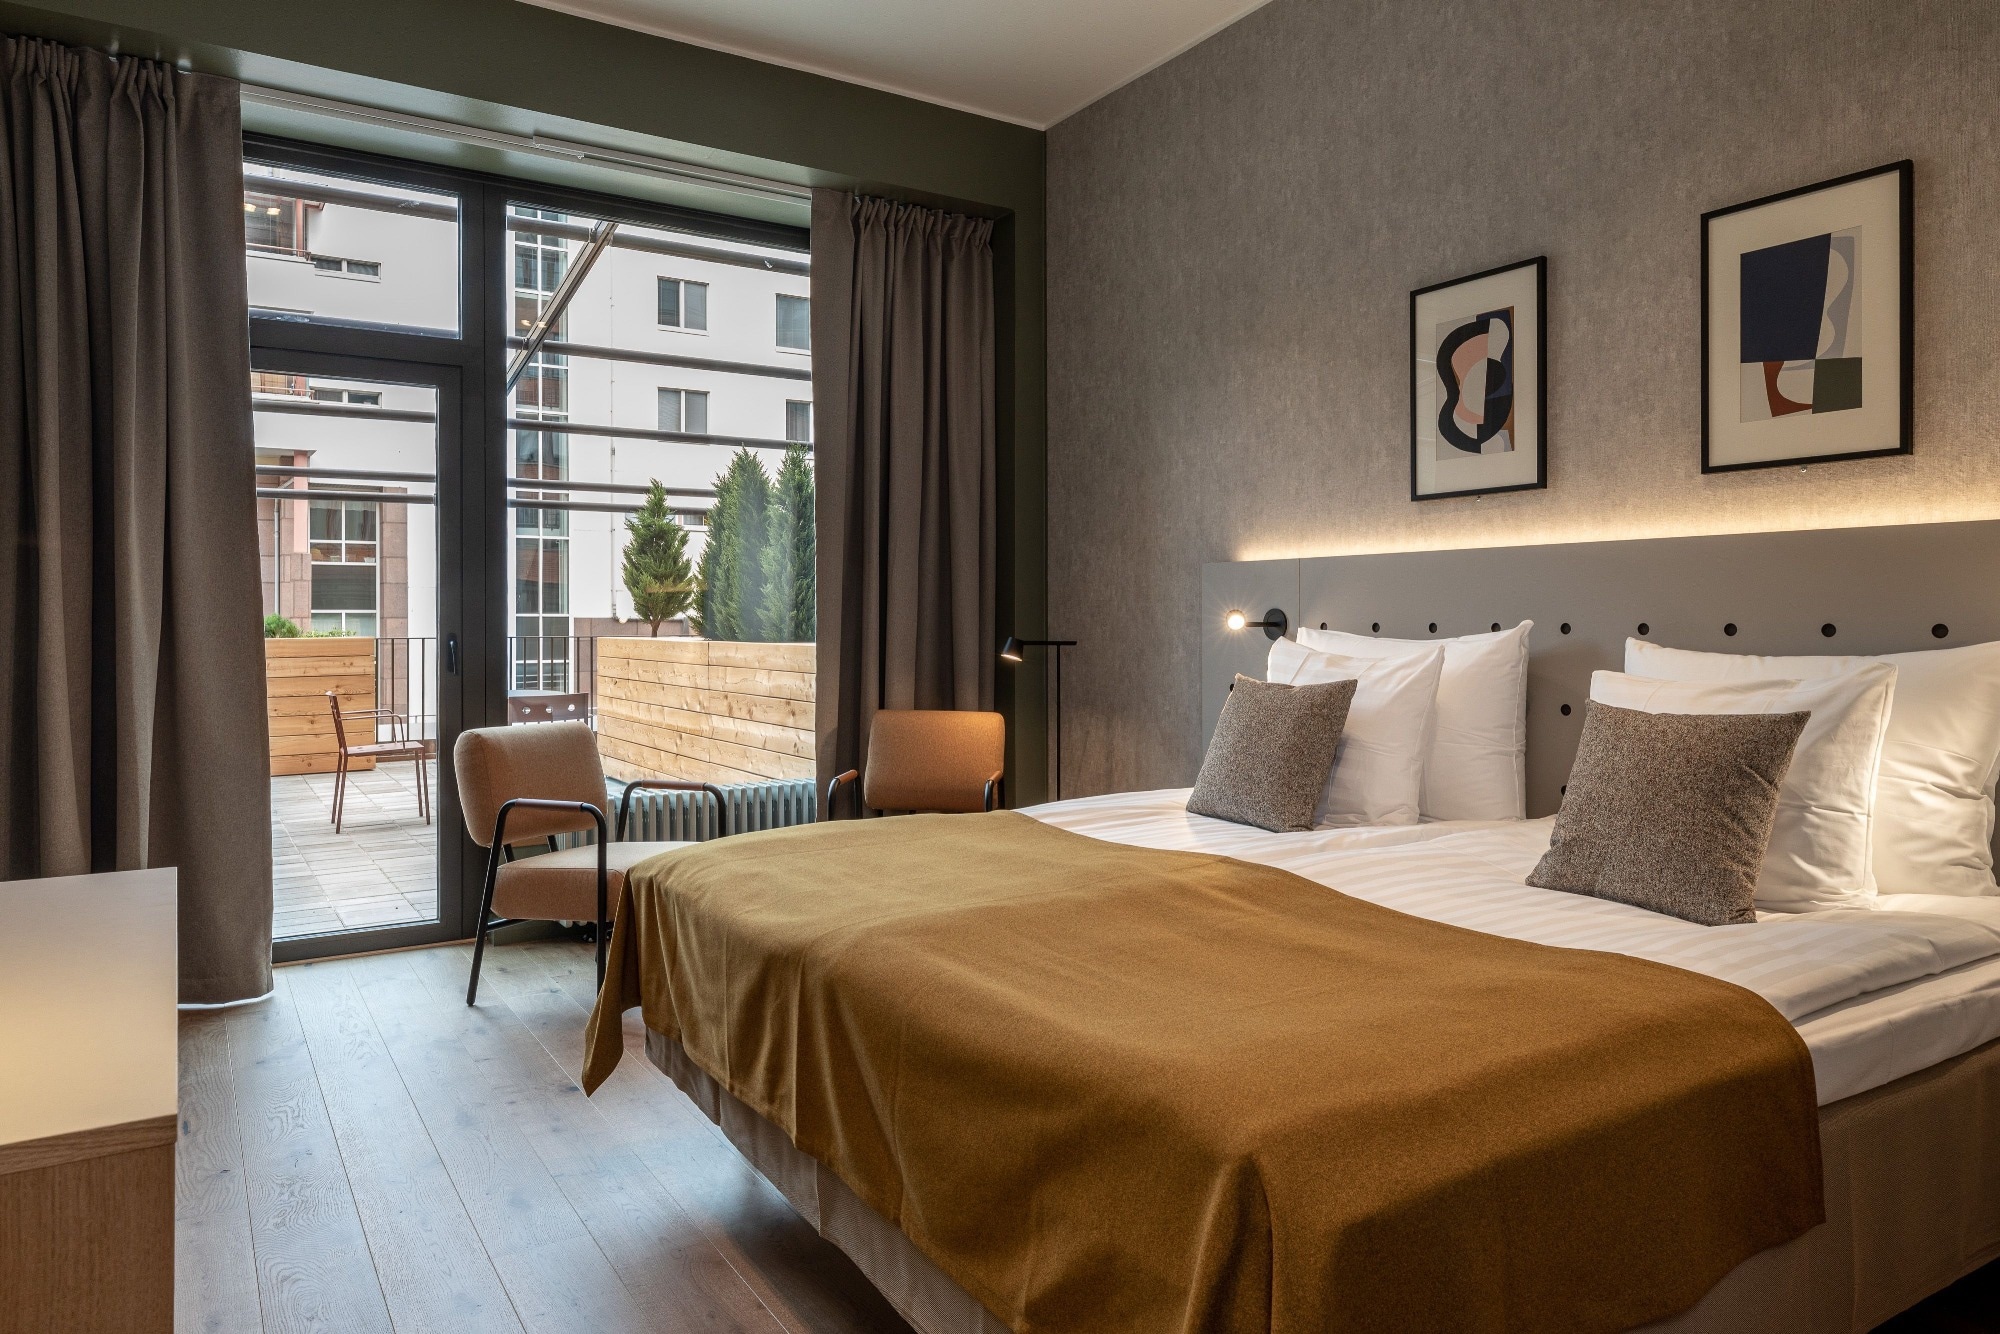 Scandic Opens Large New Hotel in Historic Printing House in Helsinki